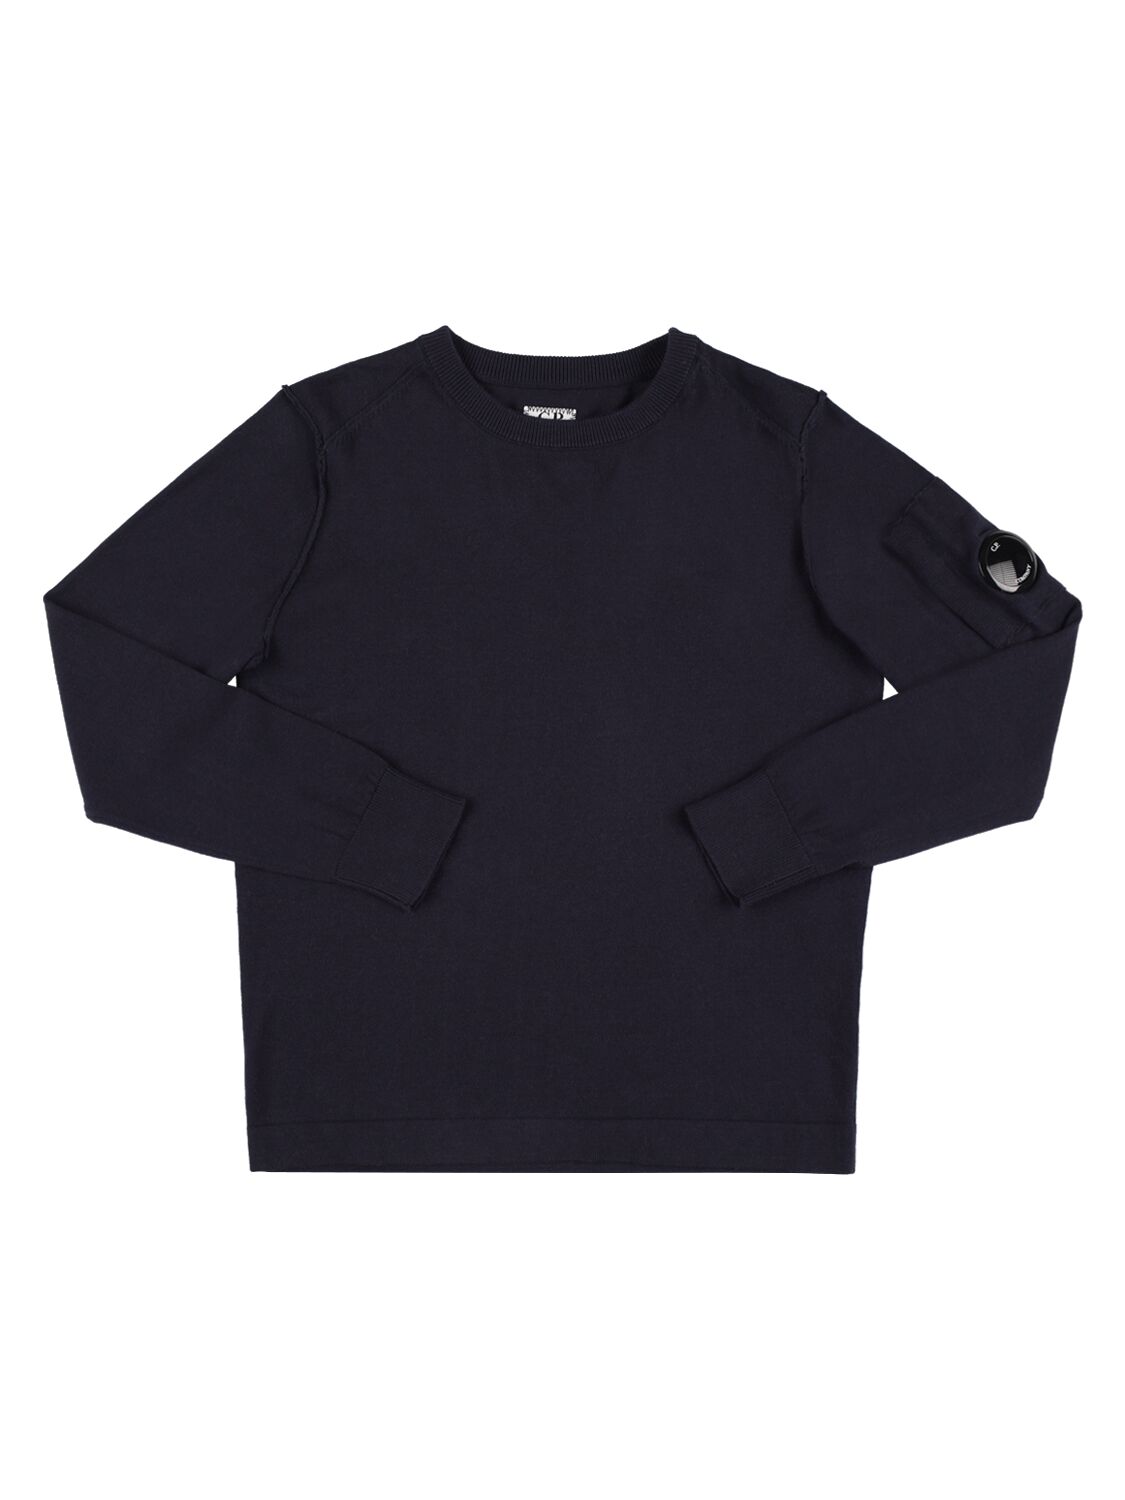 C.p. Company Kids' Cotton Knit Jumper In Navy